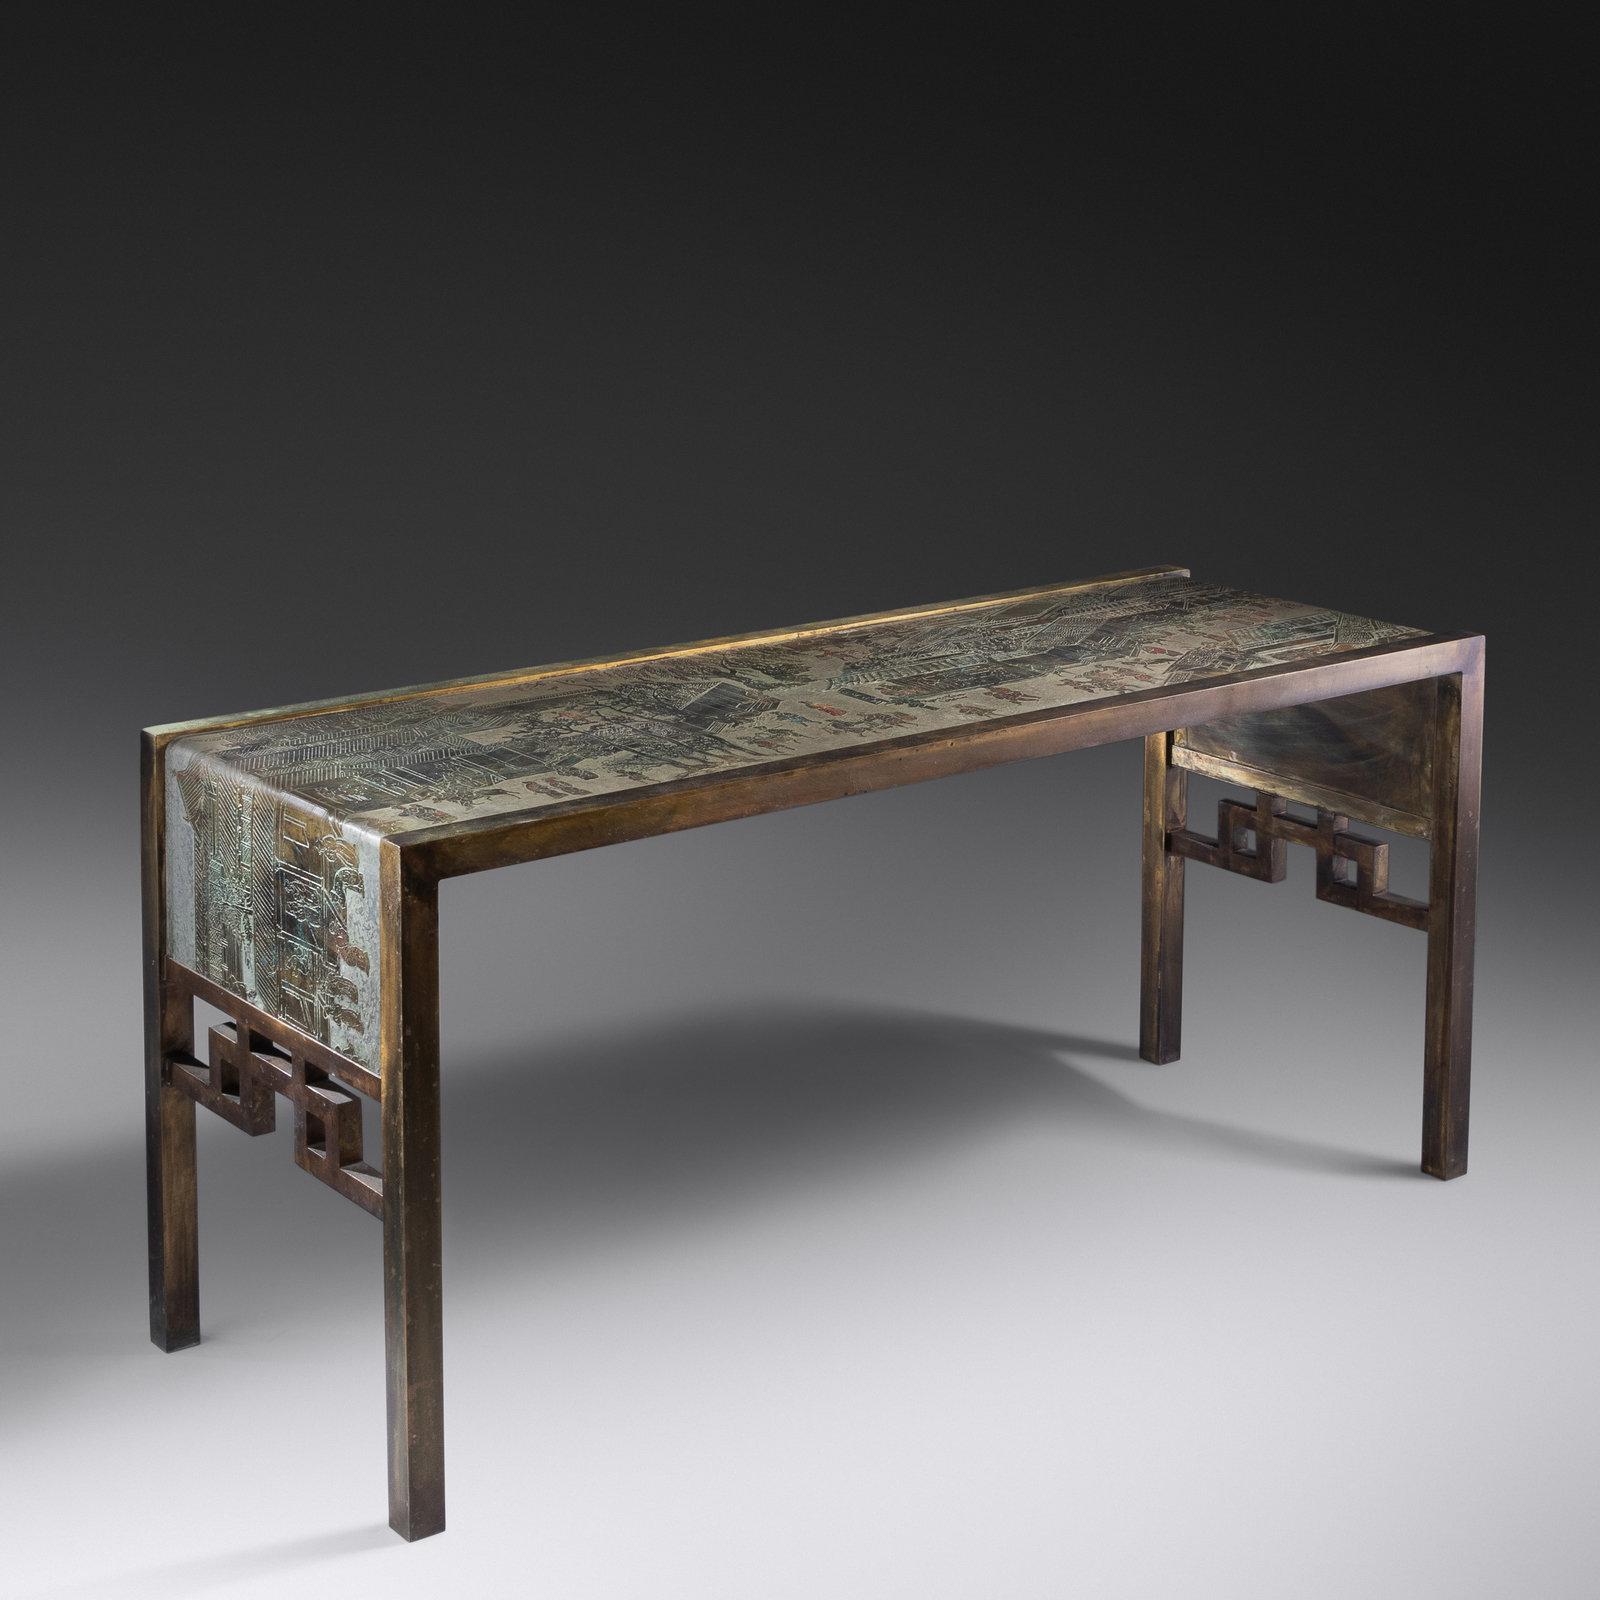 Philip and Kelvin LaVerne Spring Festival Console Table, LaVerne Collection, USA. Etched, patinated, and polychromed bronze, pewter with raised signature to top in metalwork and manufacturer's label. American, 1937.